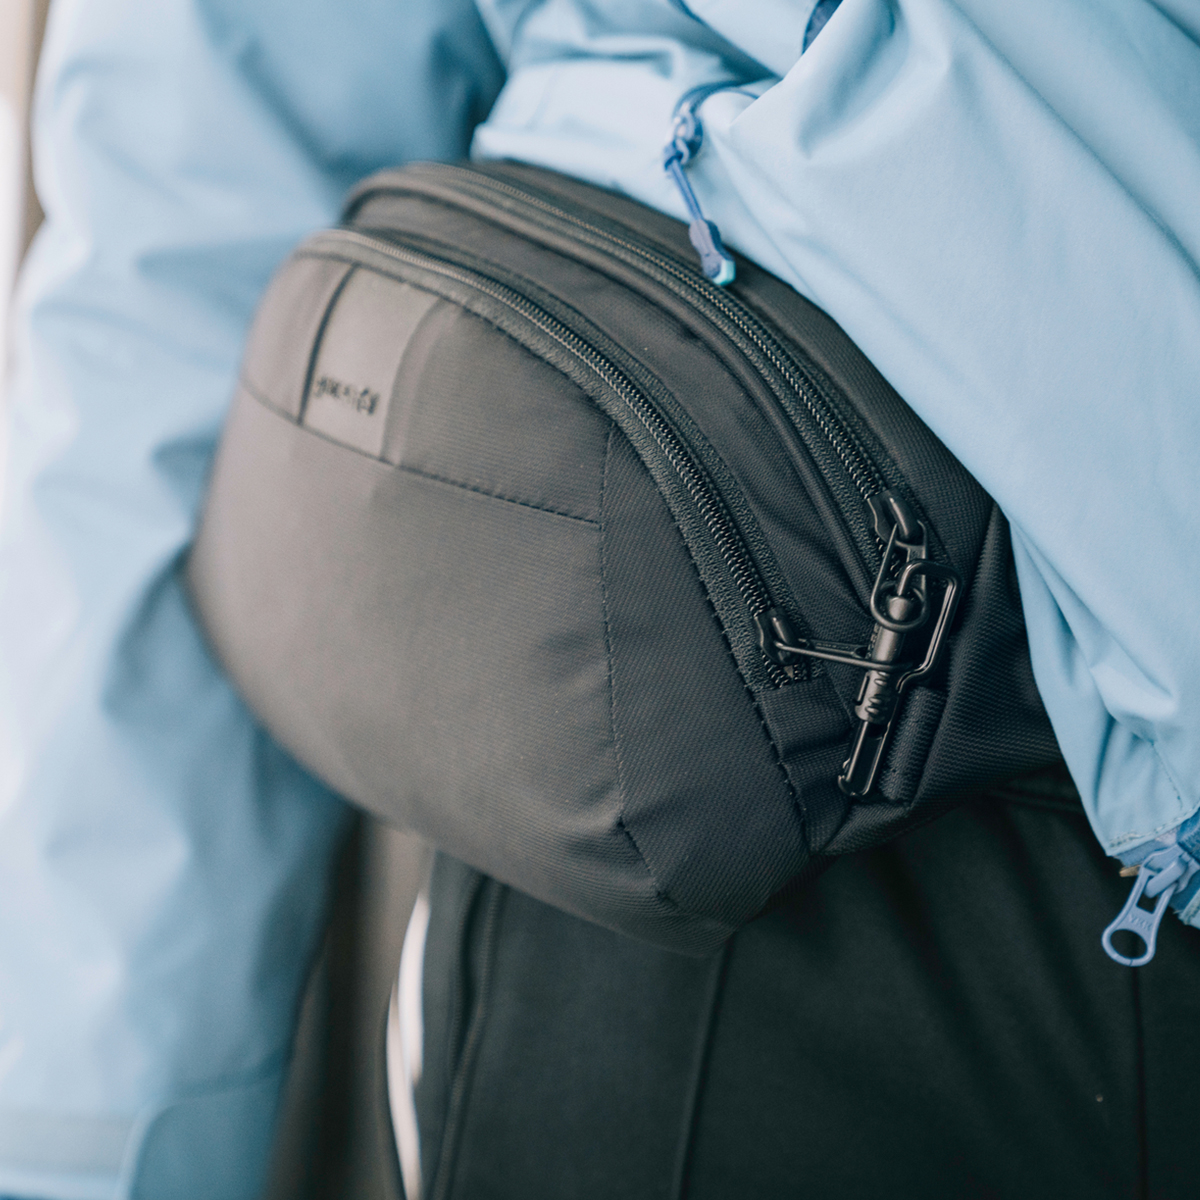 Just because it's small doesn't mean there's any less anti-theft technology.  

The Metrosafe LS120 Hip Pack includes lockable zippers, cut-resistant materials and strap, and an RFID-blocking pocket.

#hippack

#protectwhatsvaluable #protectyourbelongings #antitheft